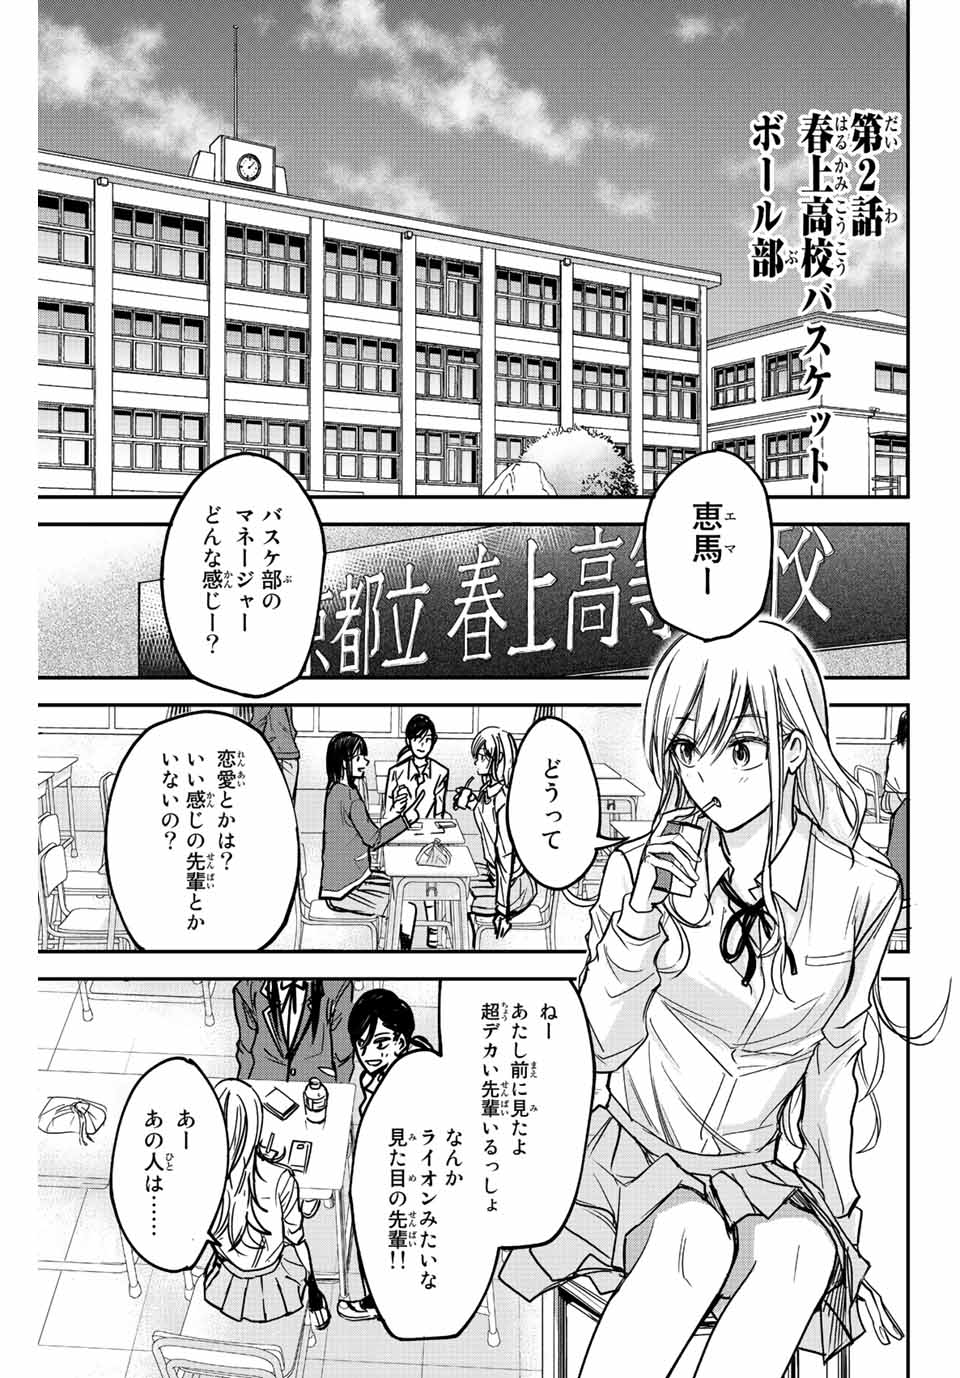 B＆ALIVE 第2.1話 - Page 1